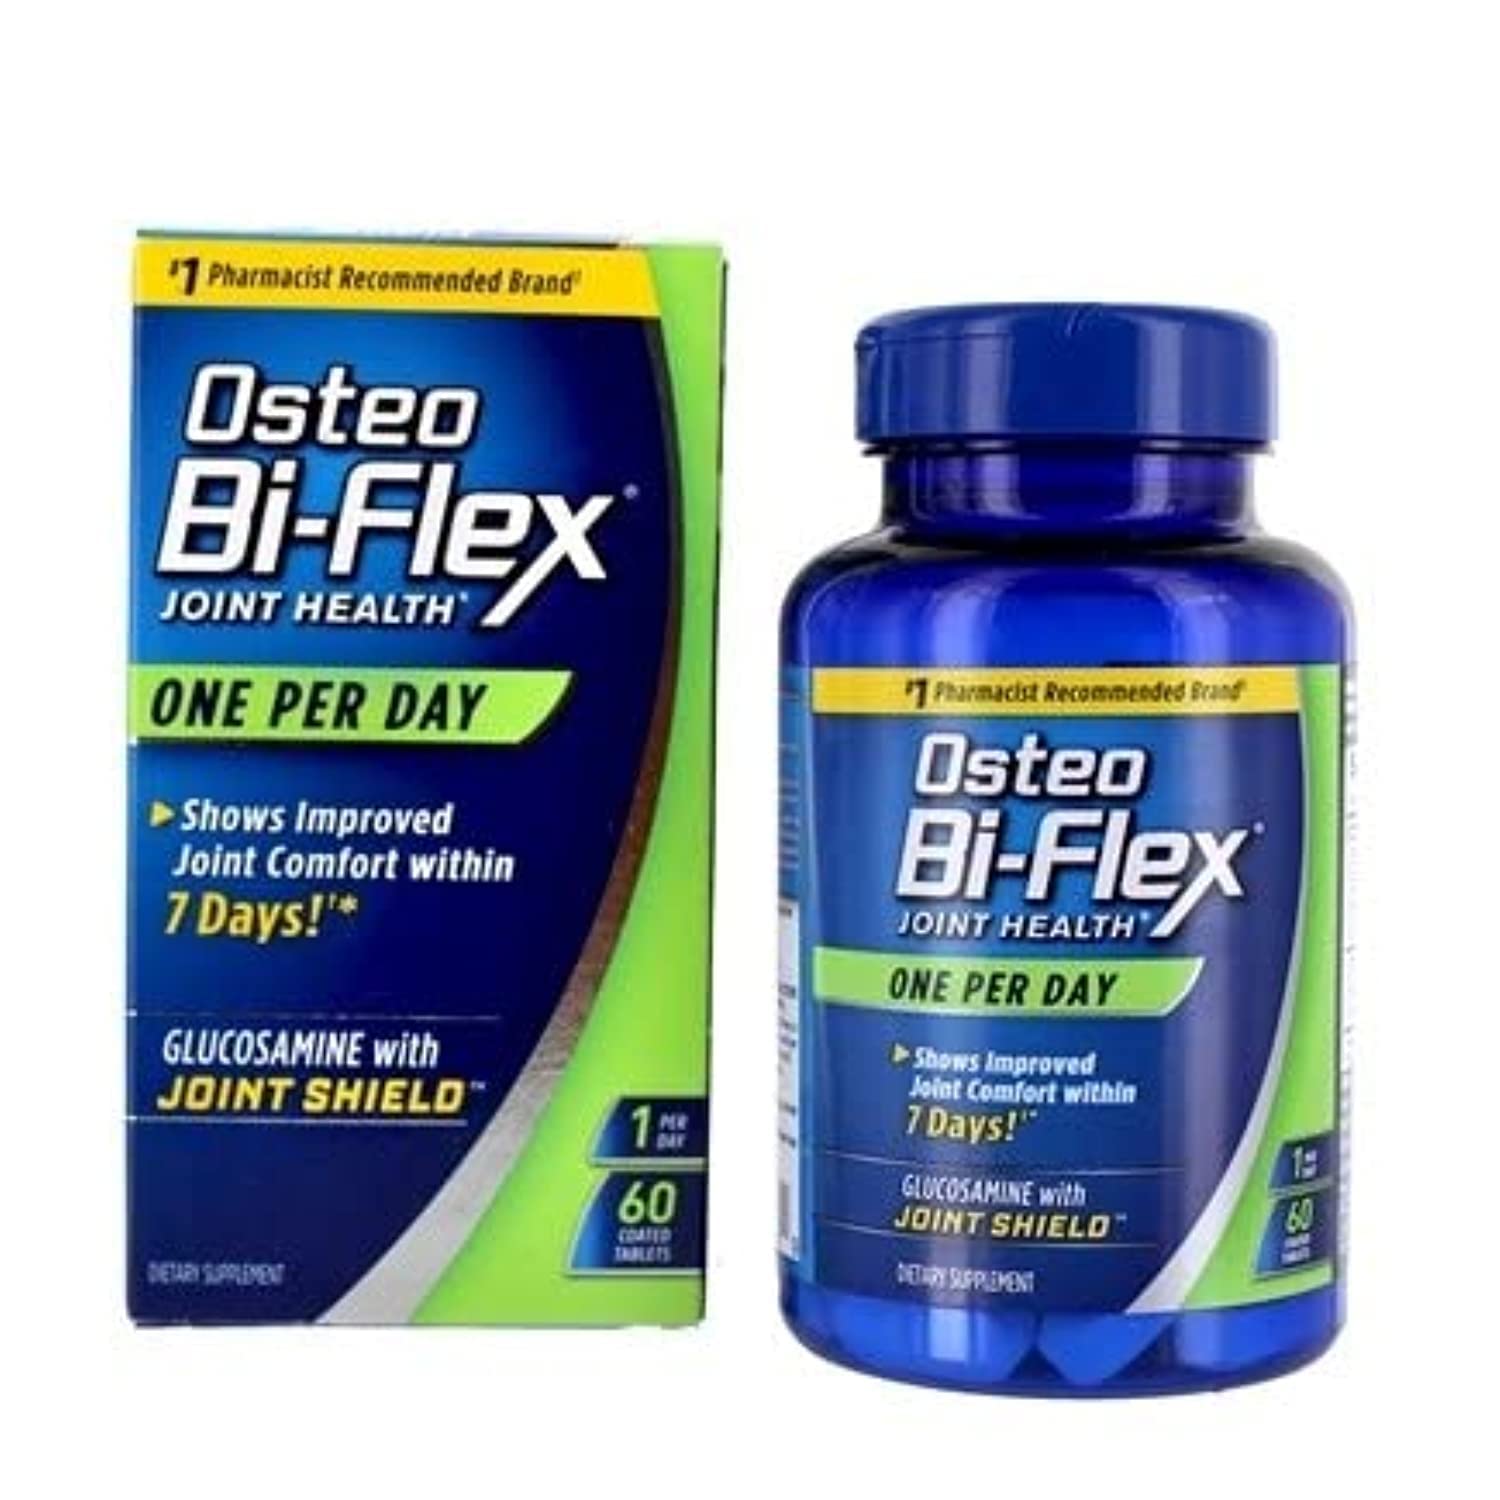 Osteo BiFlex One Per Day Glucosamine Joint Shield Dietary Supplement, Helps Strengthen Joints, 60 Count